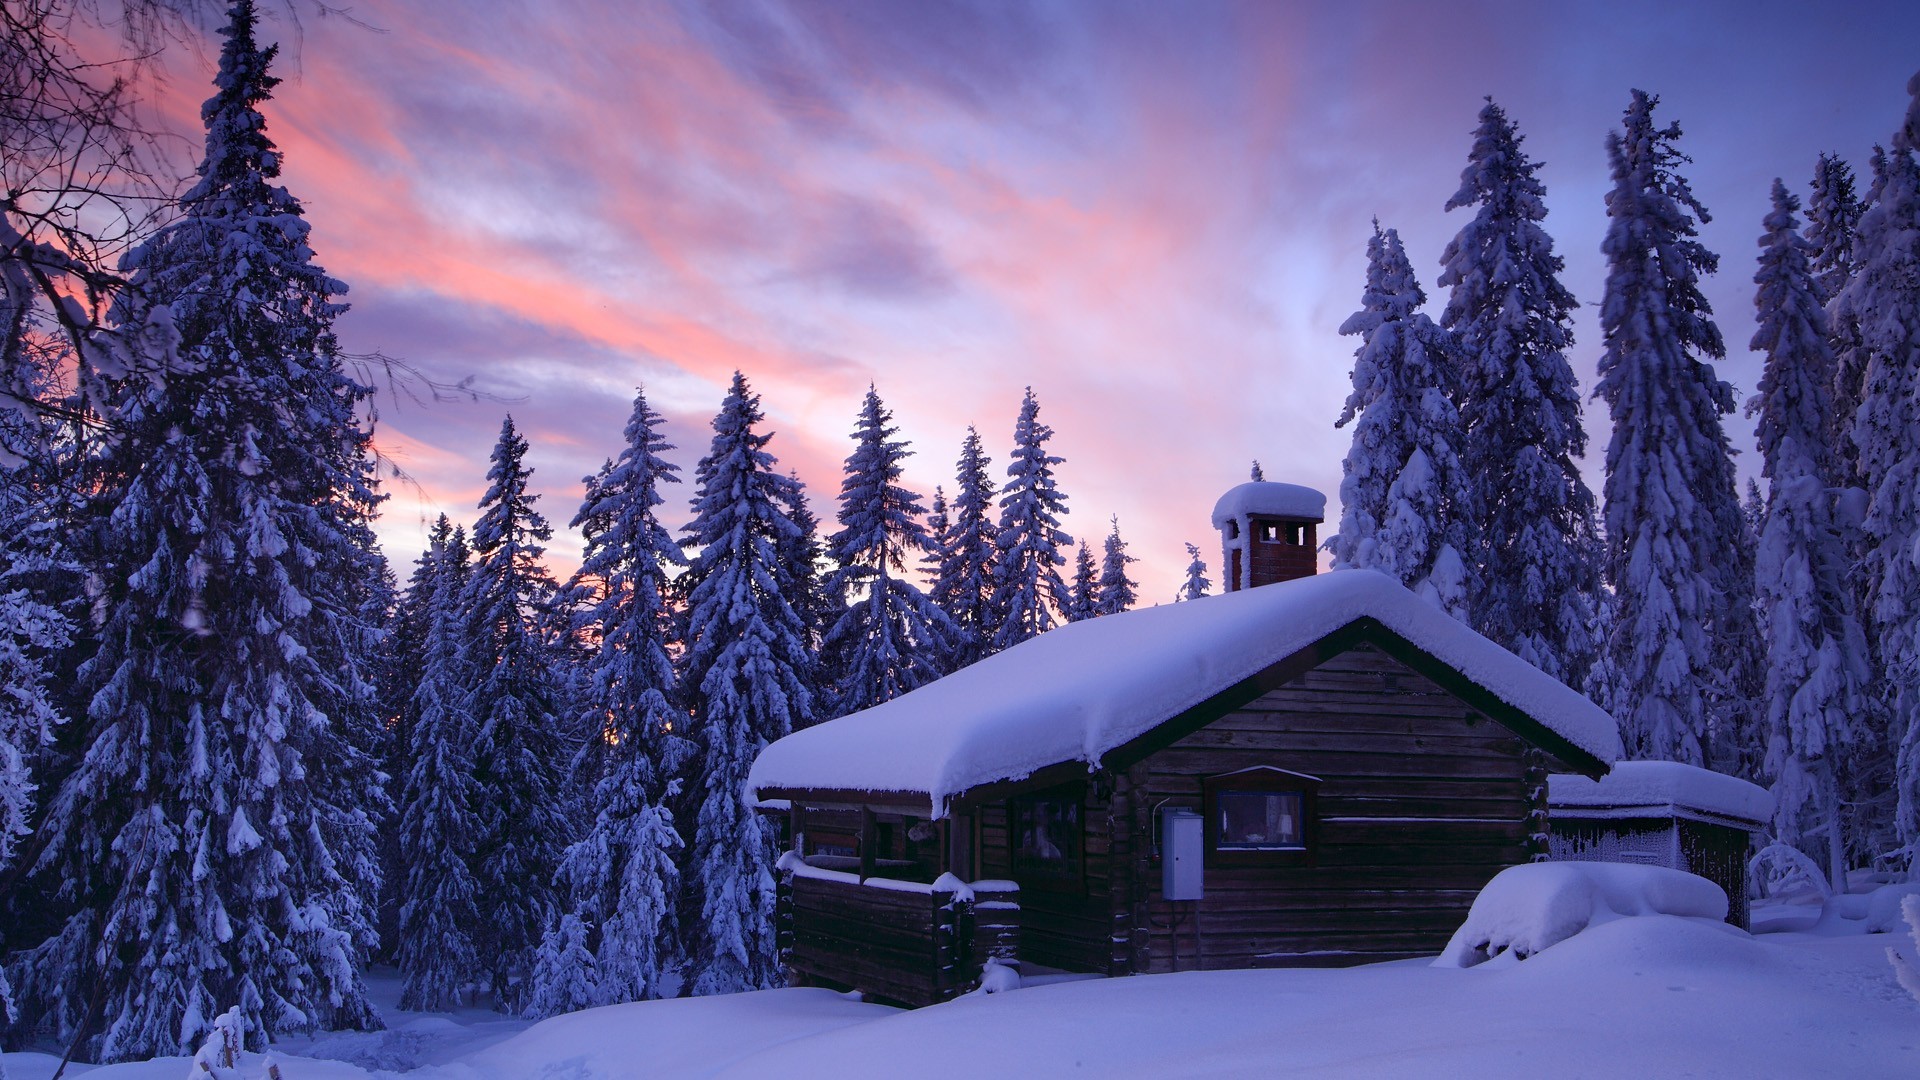 1920x1080 Log, Cabin, In, The, Wood, In, Winter, High, Definition, Wallpaper, For,  Desktop, Background, Download, Cabin, Images, Free, Cool Photos, Hd,  Widescreen, ...